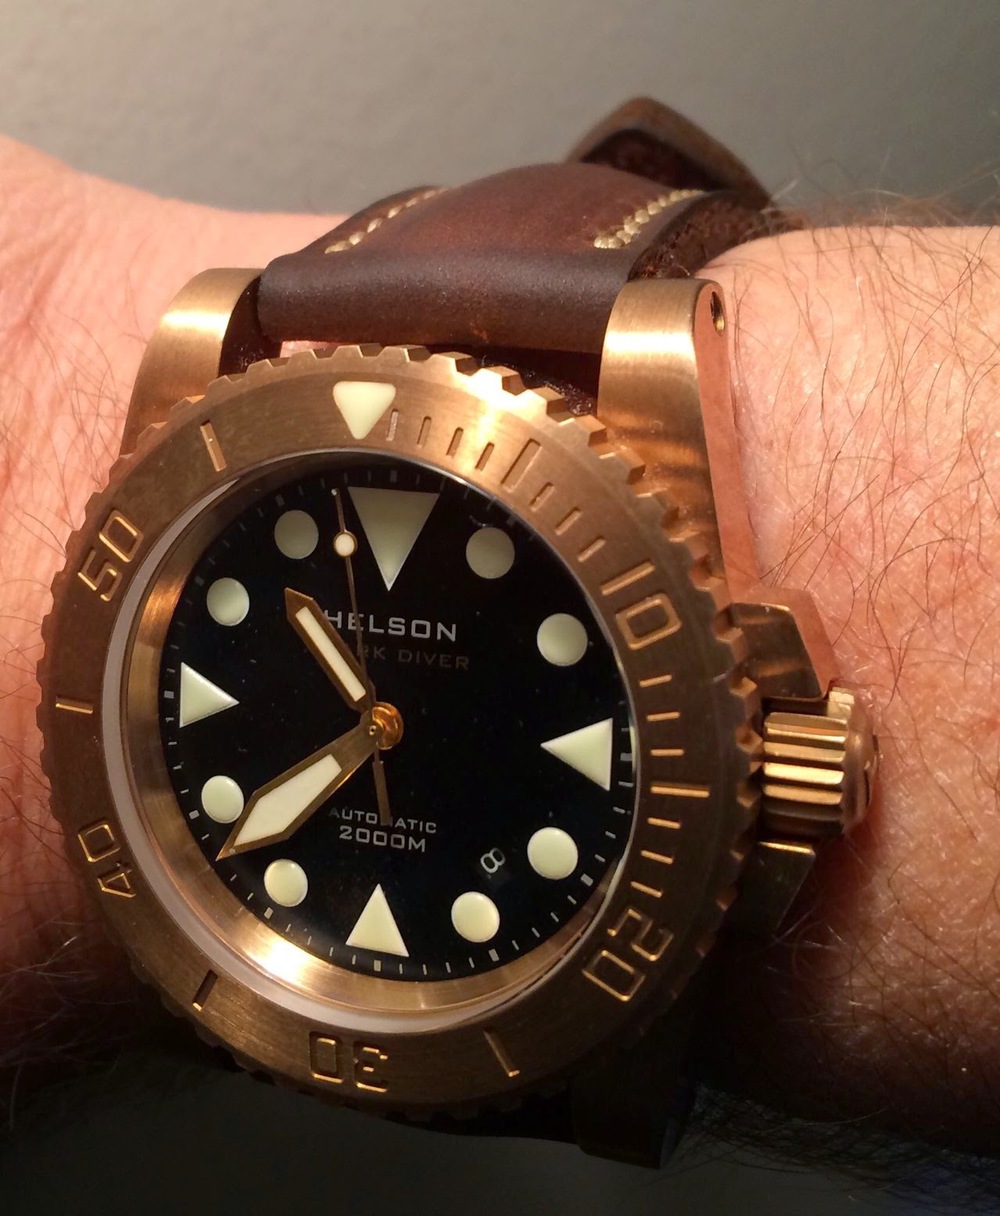 Some of you may have seen the Helson Shark Diver Watch - Surgical Steel. — OceanicDreams